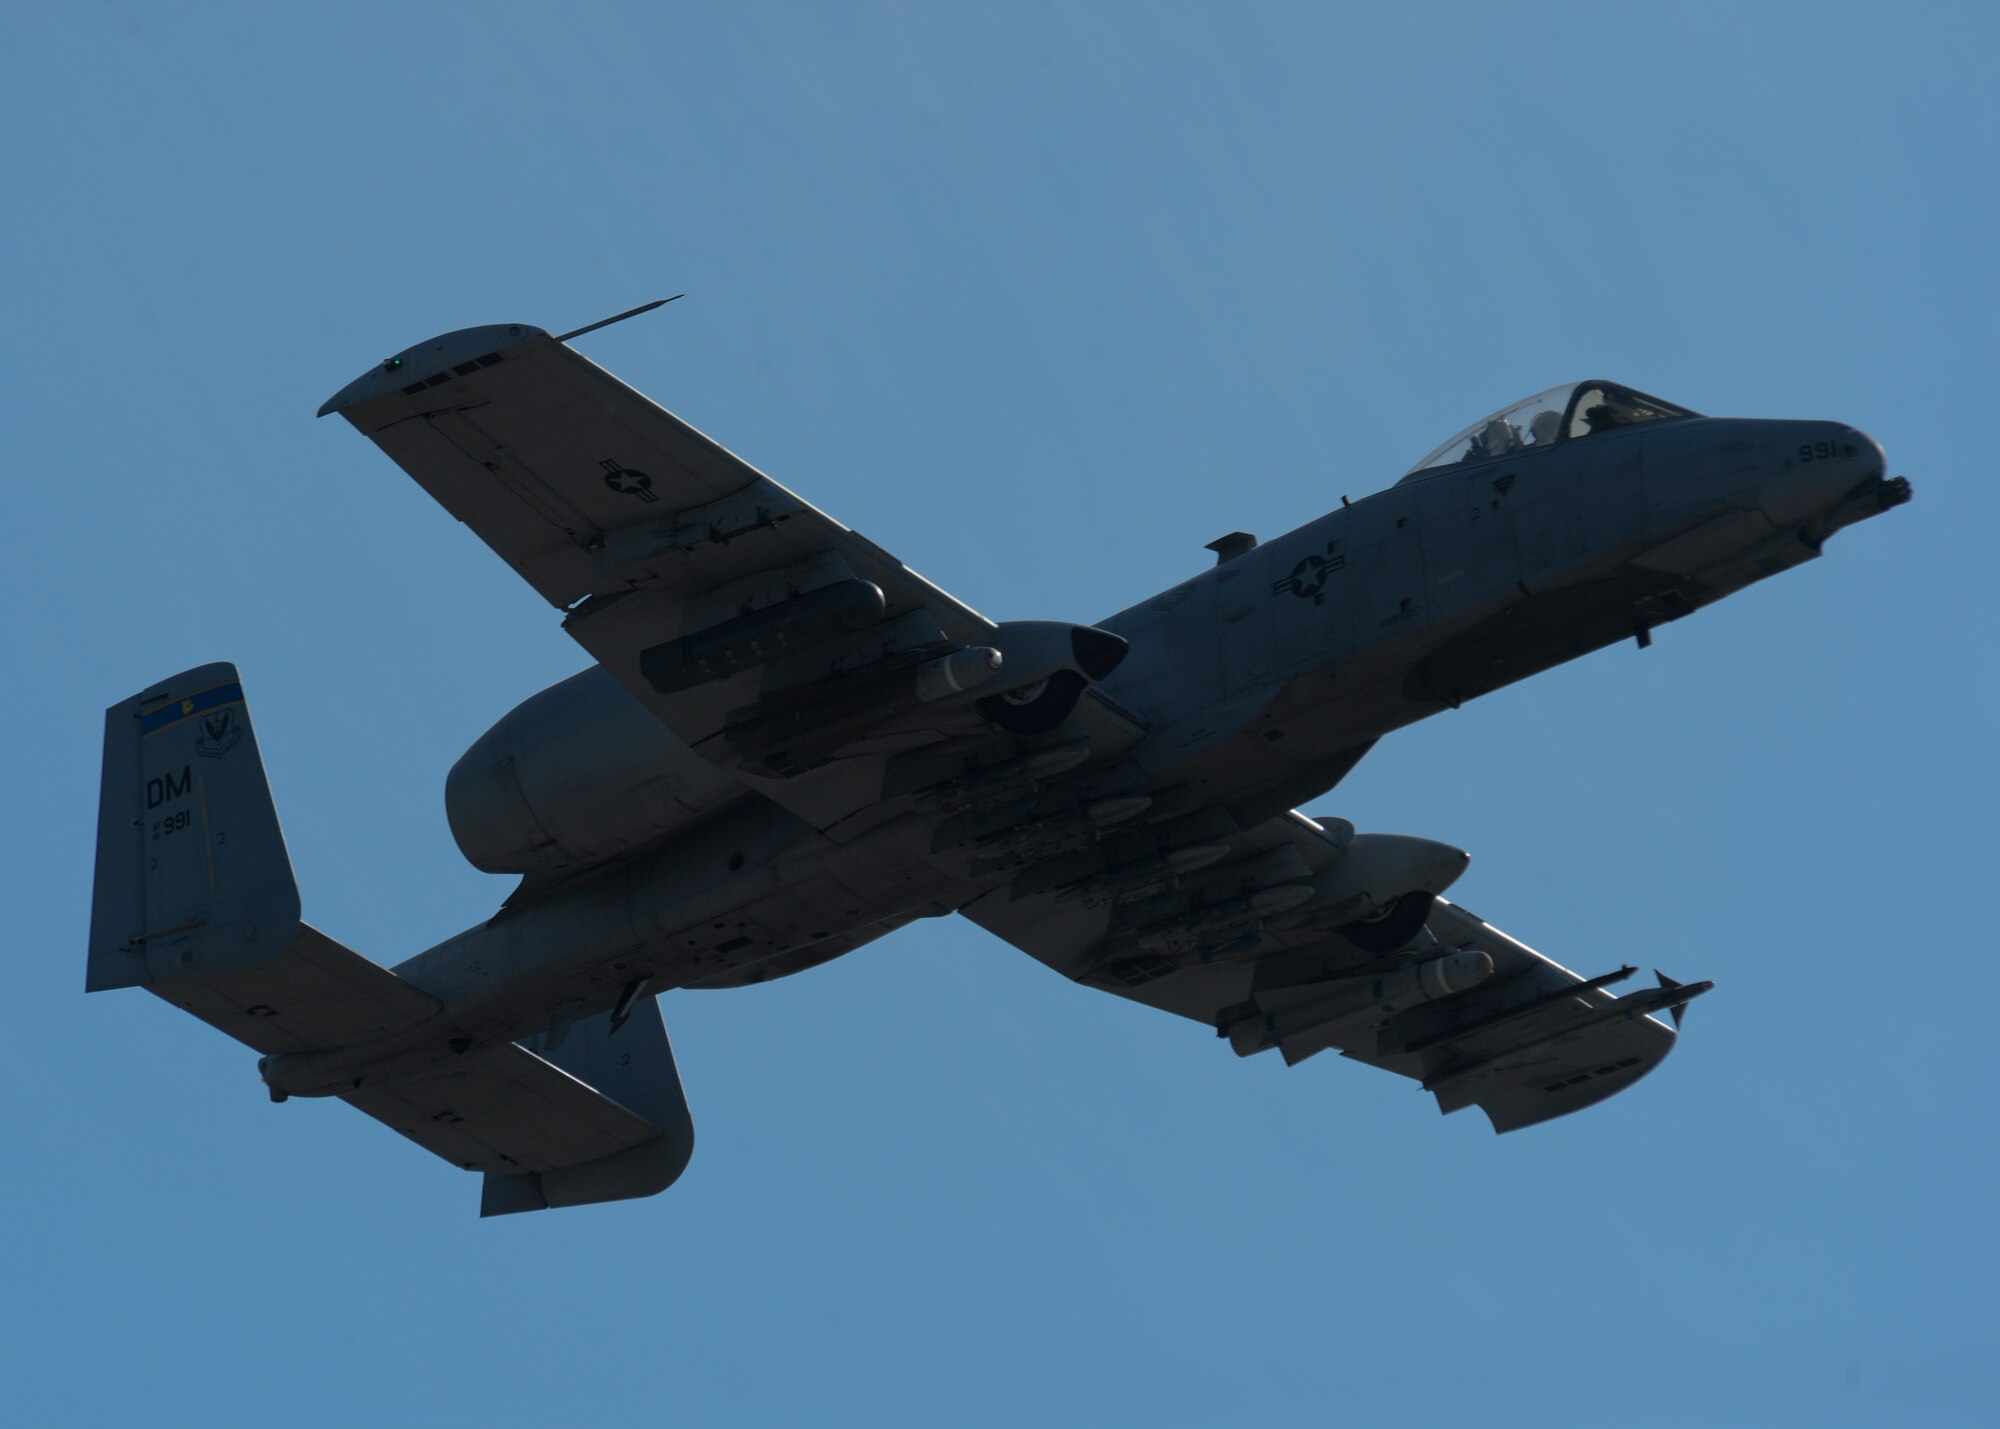 A U.S. Air Force A-10 Thunderbolt II pilot assigned to the 354th Expeditionary Fighter Squadron takes off from the flightline during a theater security package deployment at Campia Turzii, Romania, April 14, 2015.The A-10 supports Air Force missions around the world as part of the U.S. Air Force's current inventory of strike platforms, including F-15 Eagle and F-16 Fighting Falcon fighter aircraft. (U.S. Air Force photo by Staff Sgt. Joe W. McFadden/Released)